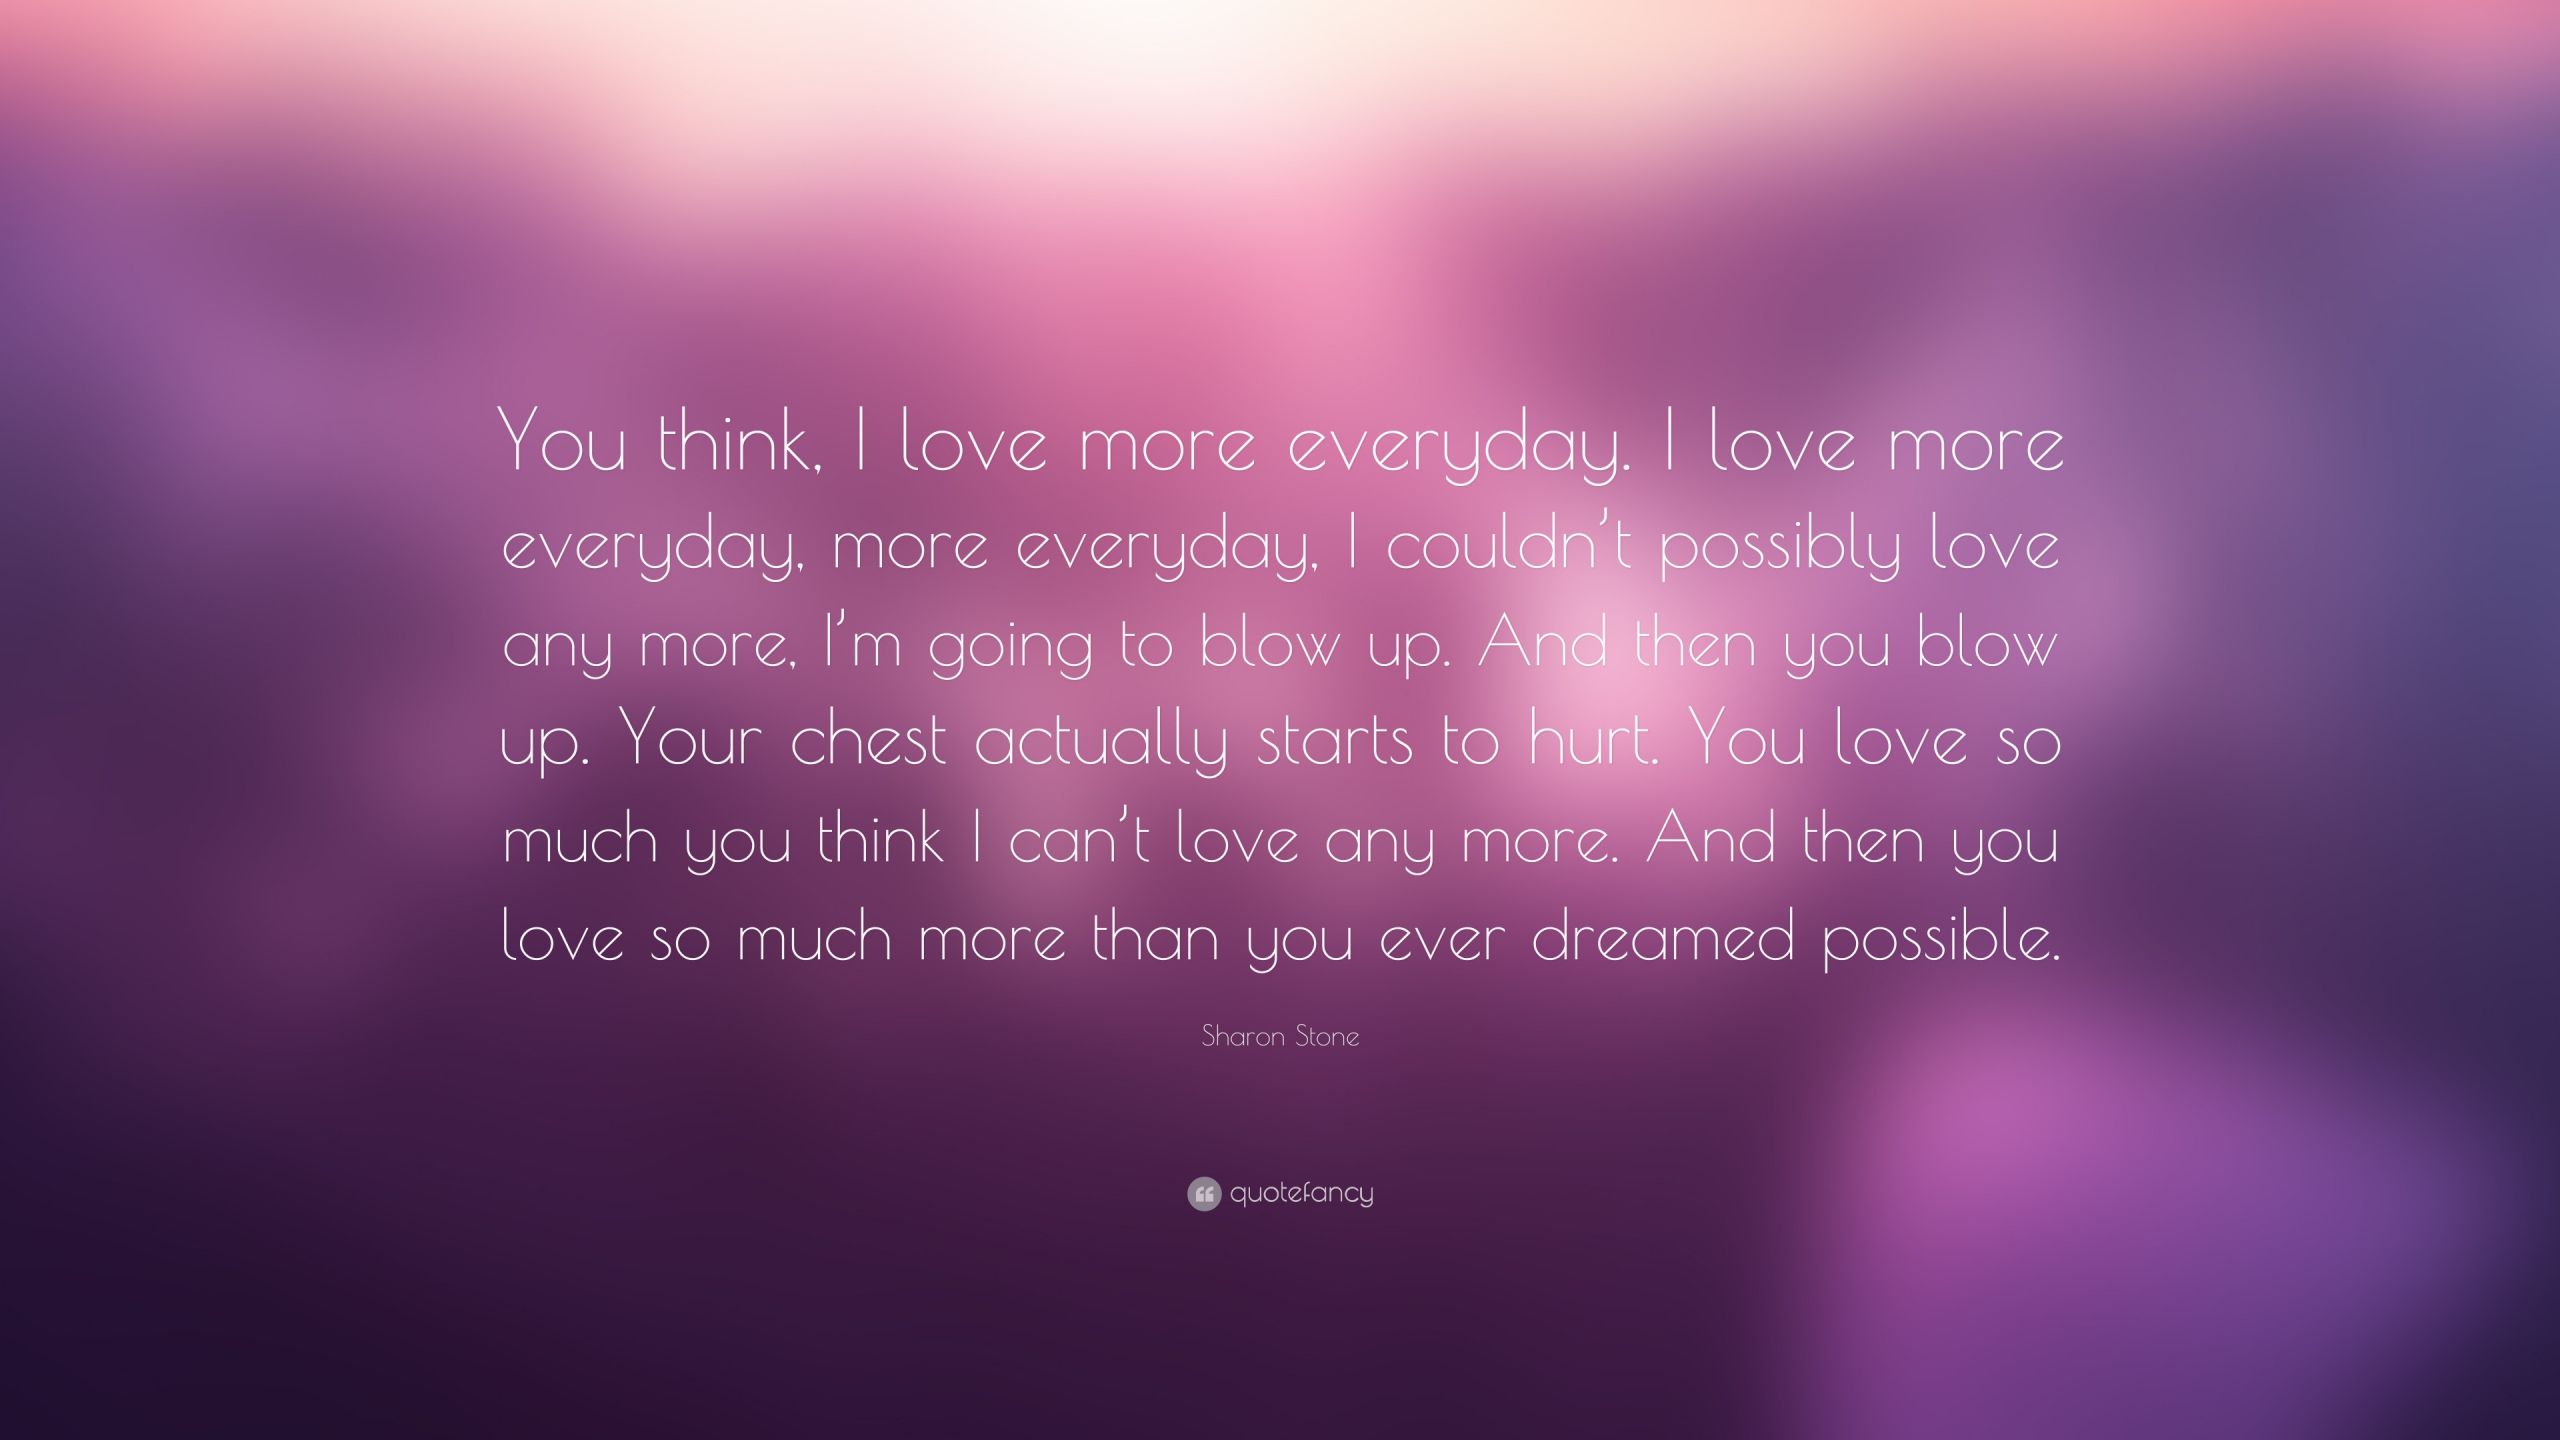 I Love You More Everyday Quotes
 Sharon Stone Quote “You think I love more everyday I